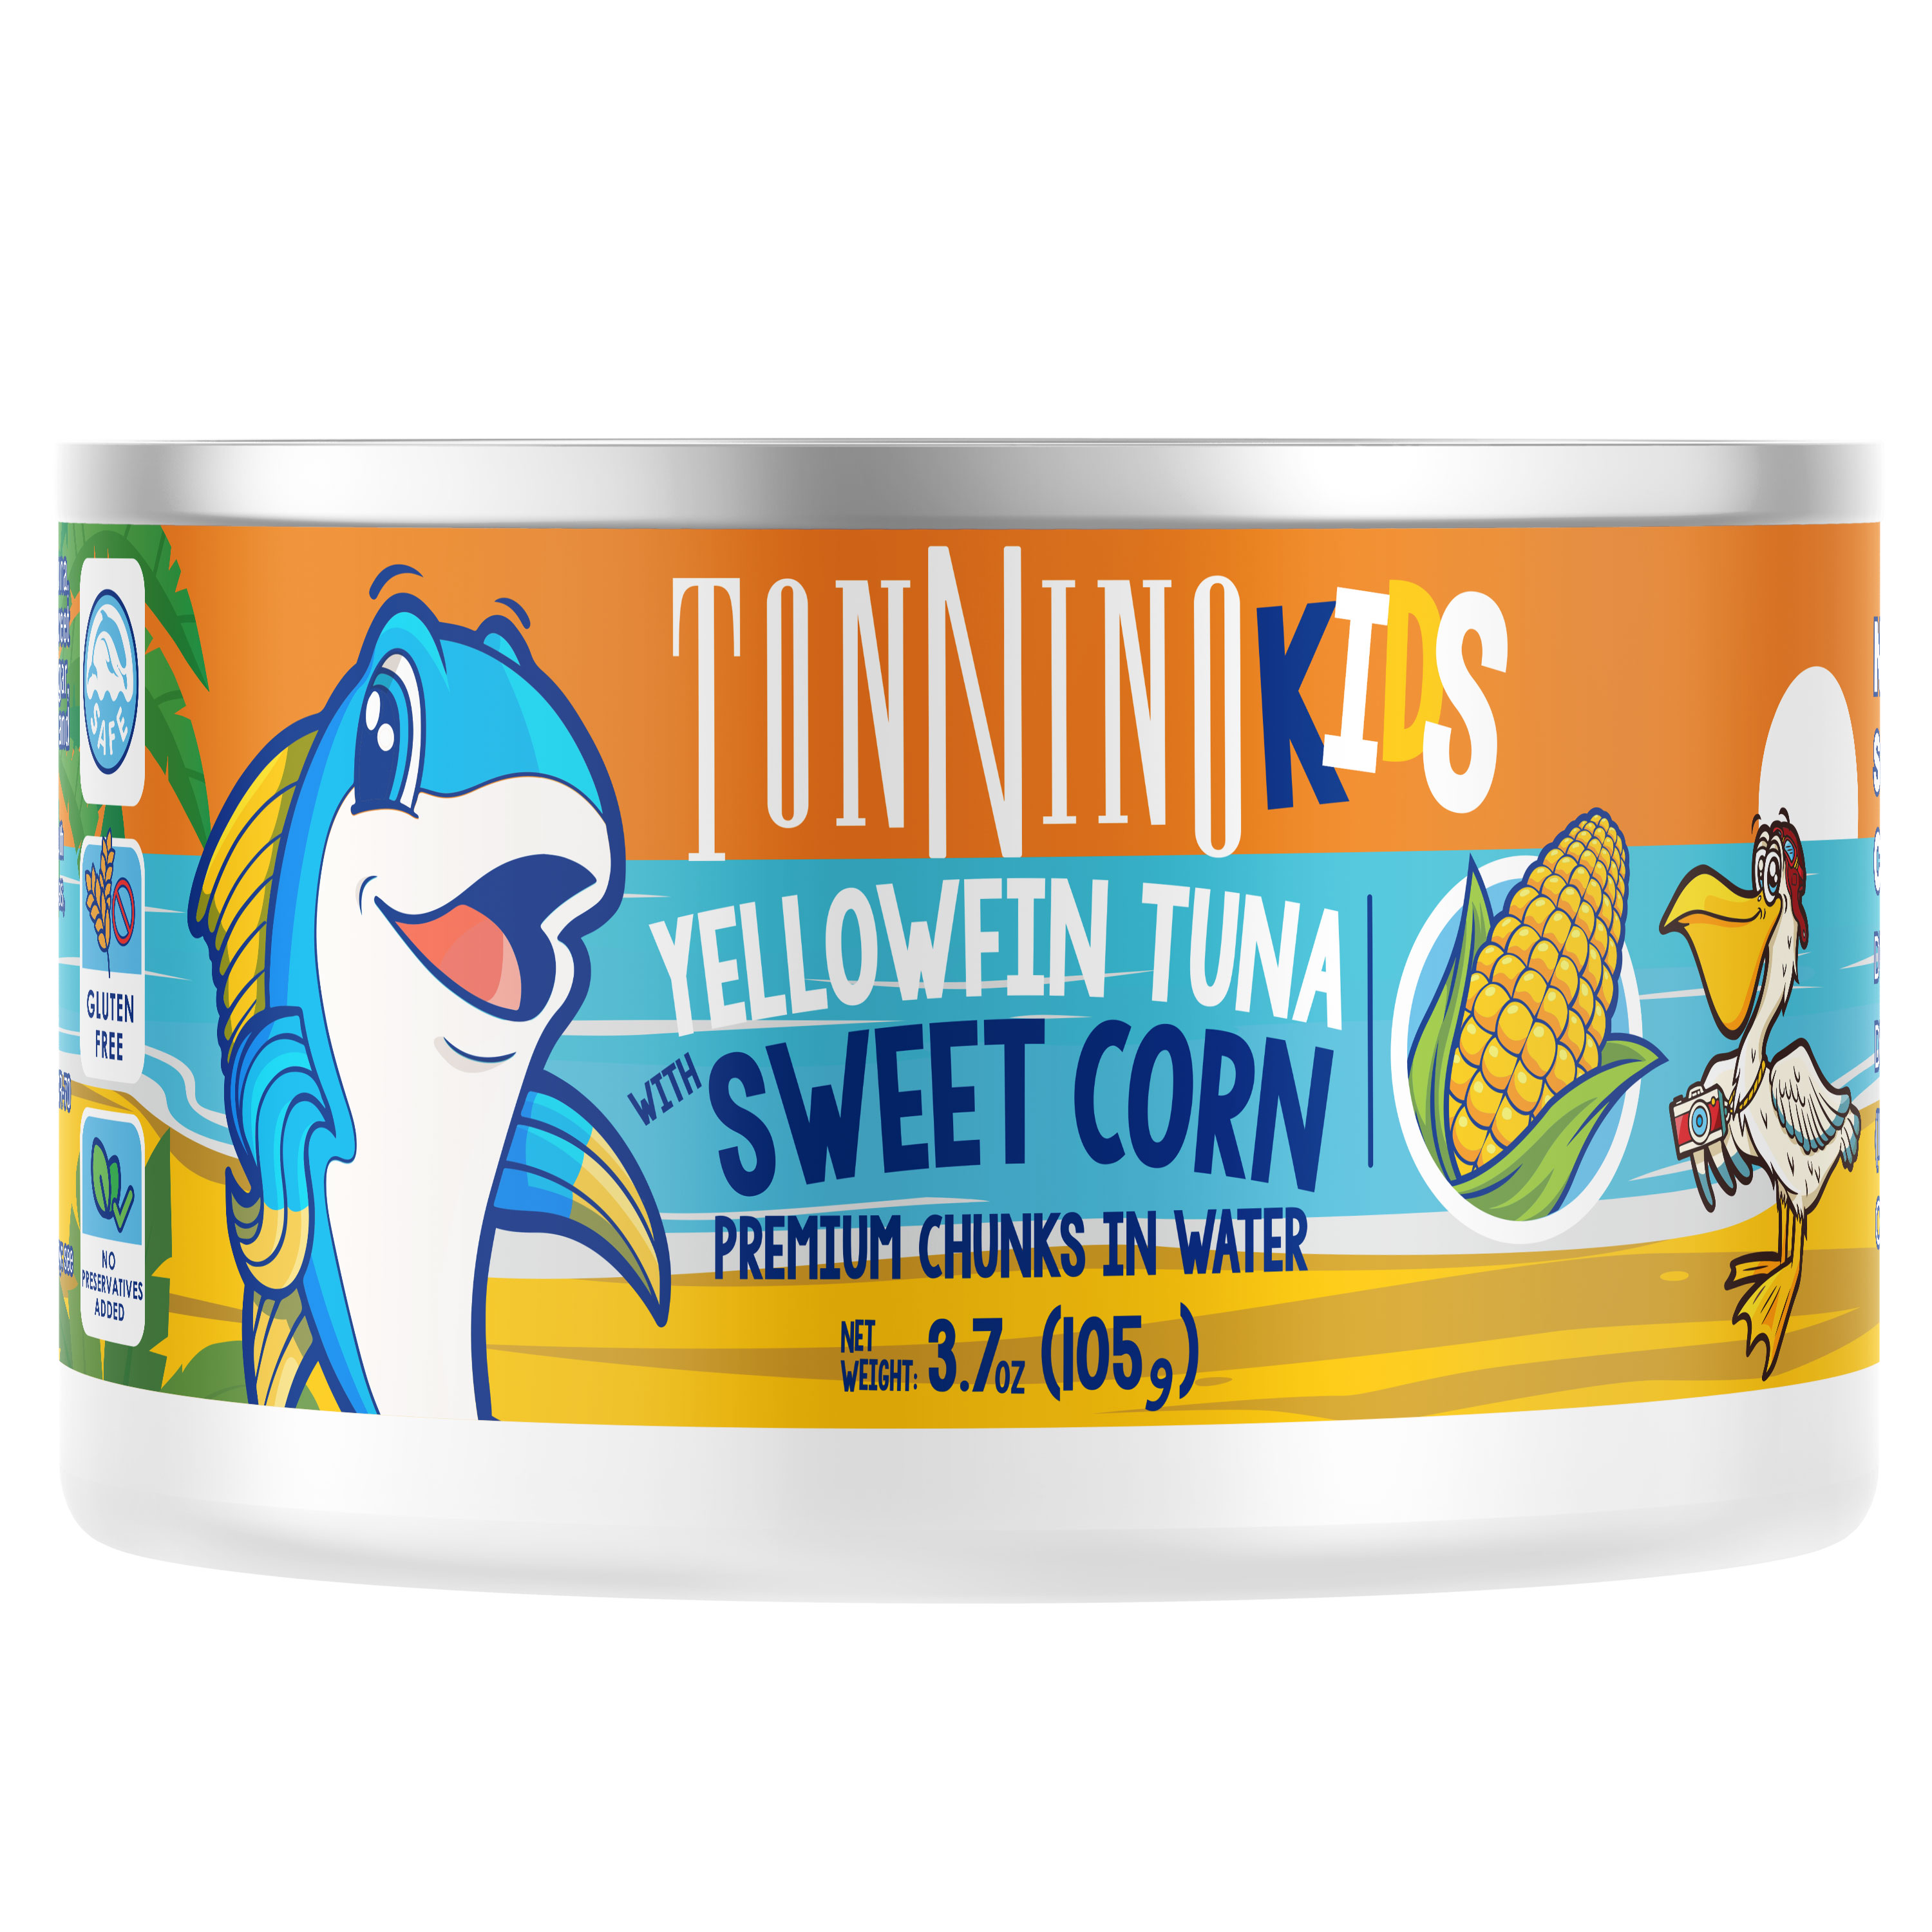 6 New Premium Products Launched by Gourmet Tuna Brand